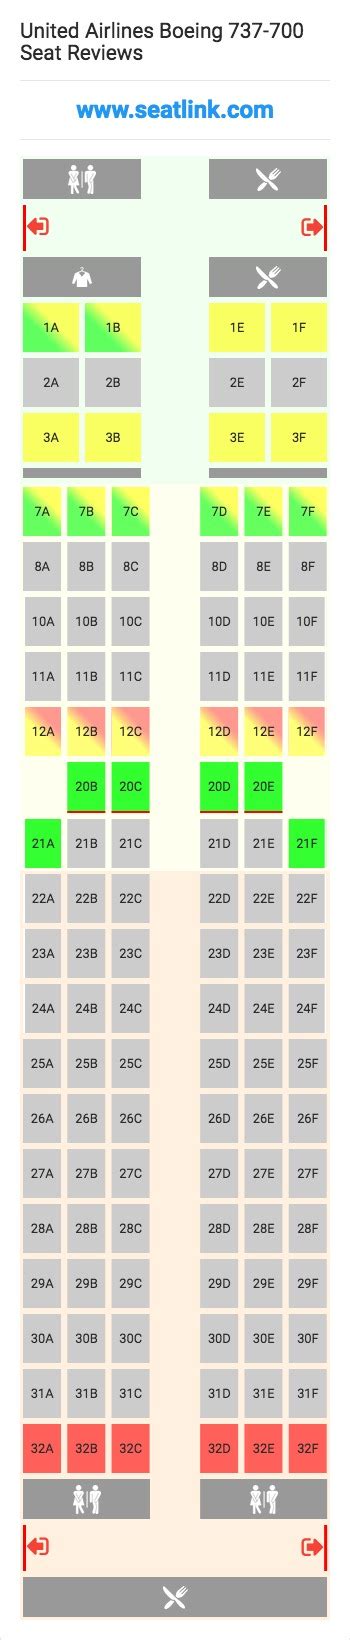 United Boeing Seating Chart Tutorial Pics